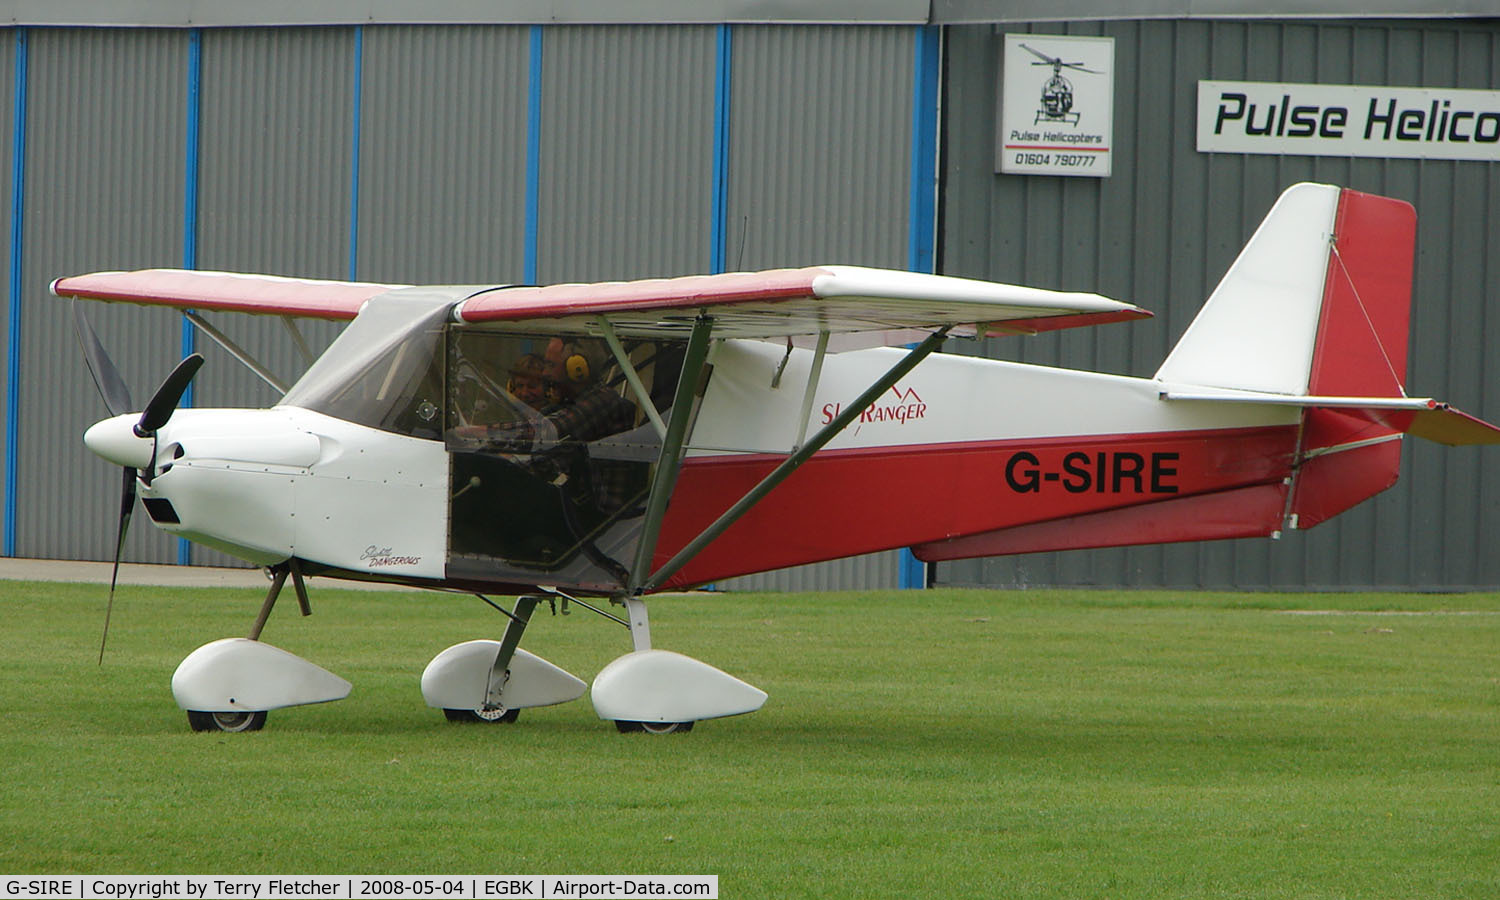 G-SIRE, 2007 Skyranger Swift 912S(1) C/N BMAA/HB/531, part of the Sywell GA scene on Tiger Moth Fly-in Day in May 2008